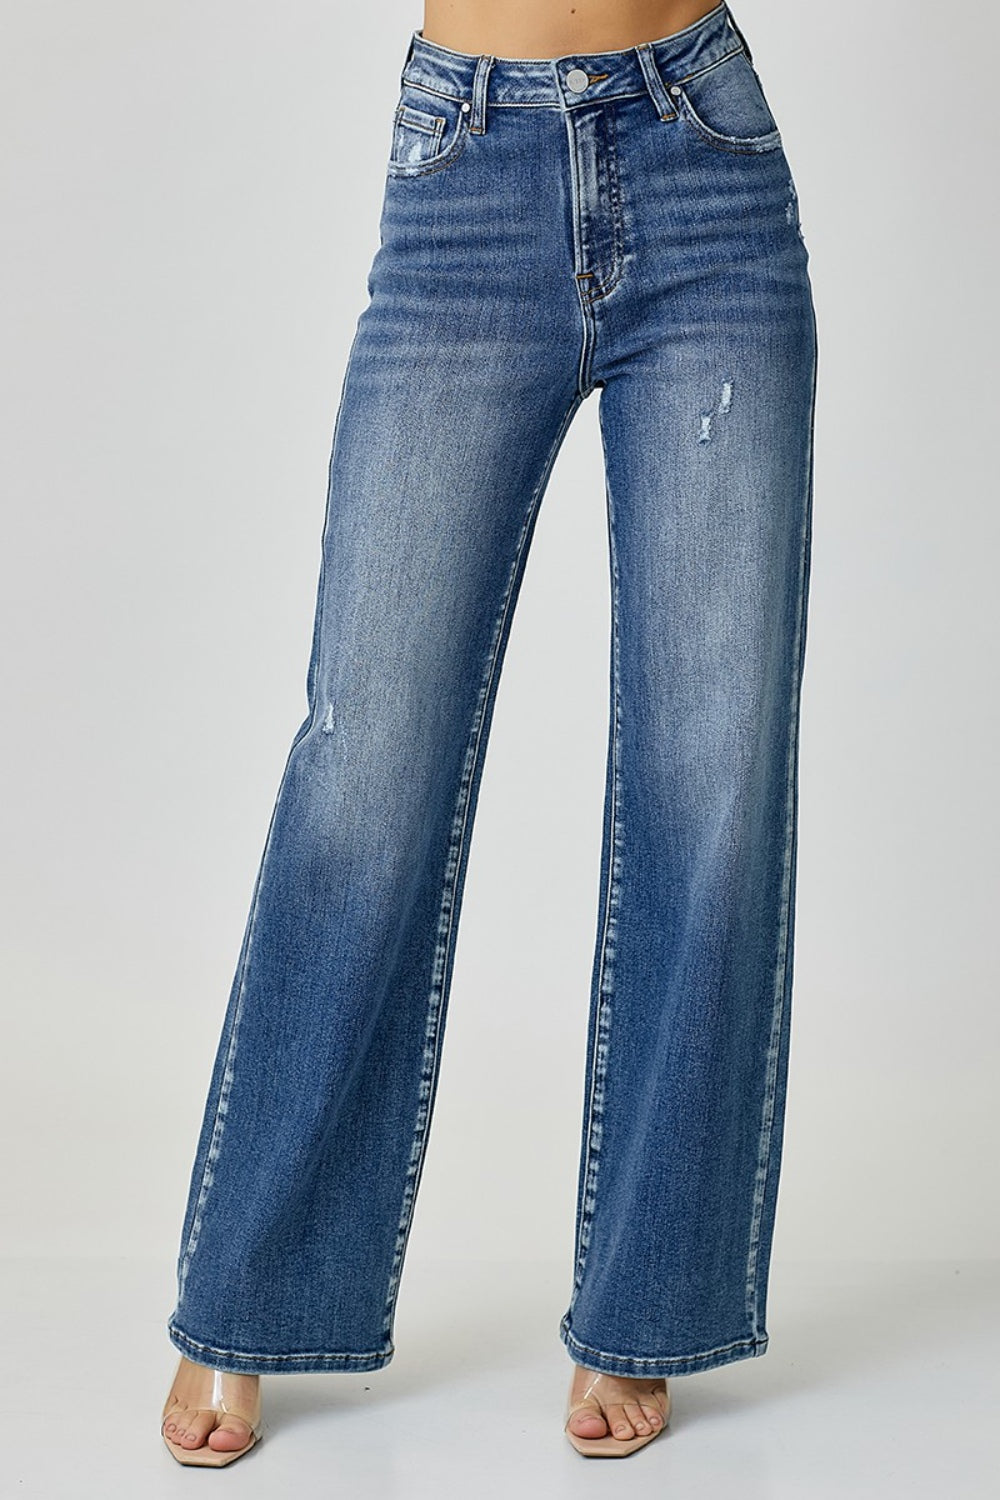 RISEN High Rise Wide Leg Jeans - Inspired Eye Boutique